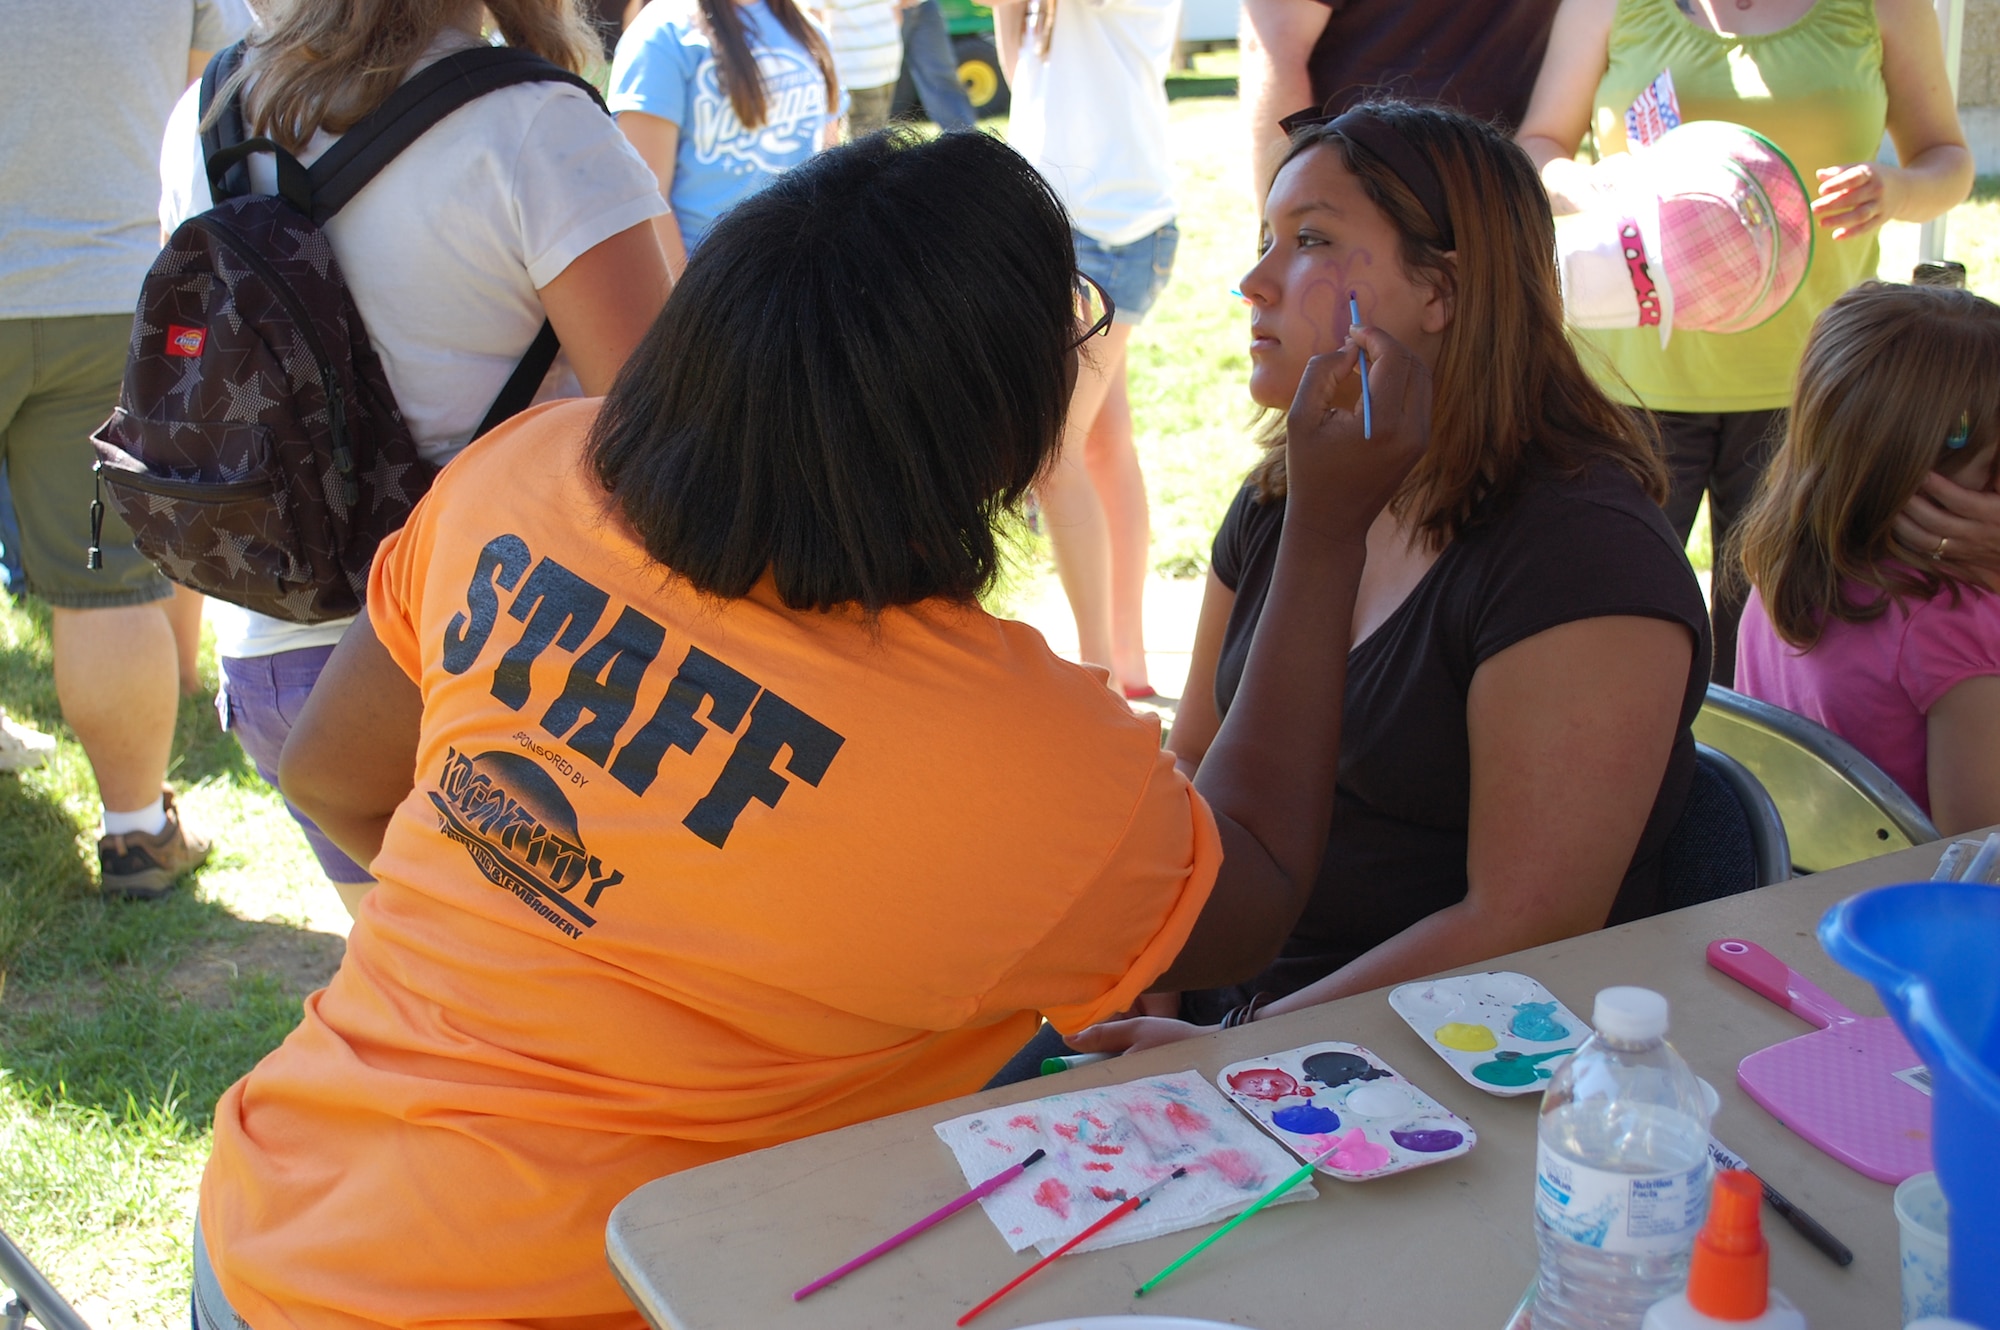 Child Development Center employee Diane Williams paints a butterfly on the cheek of Monica Payan, 14. The face painting and tattoo booth was a popular attraction at the base picnic July 1. (U.S. Air Force photo/Valerie Mullett)